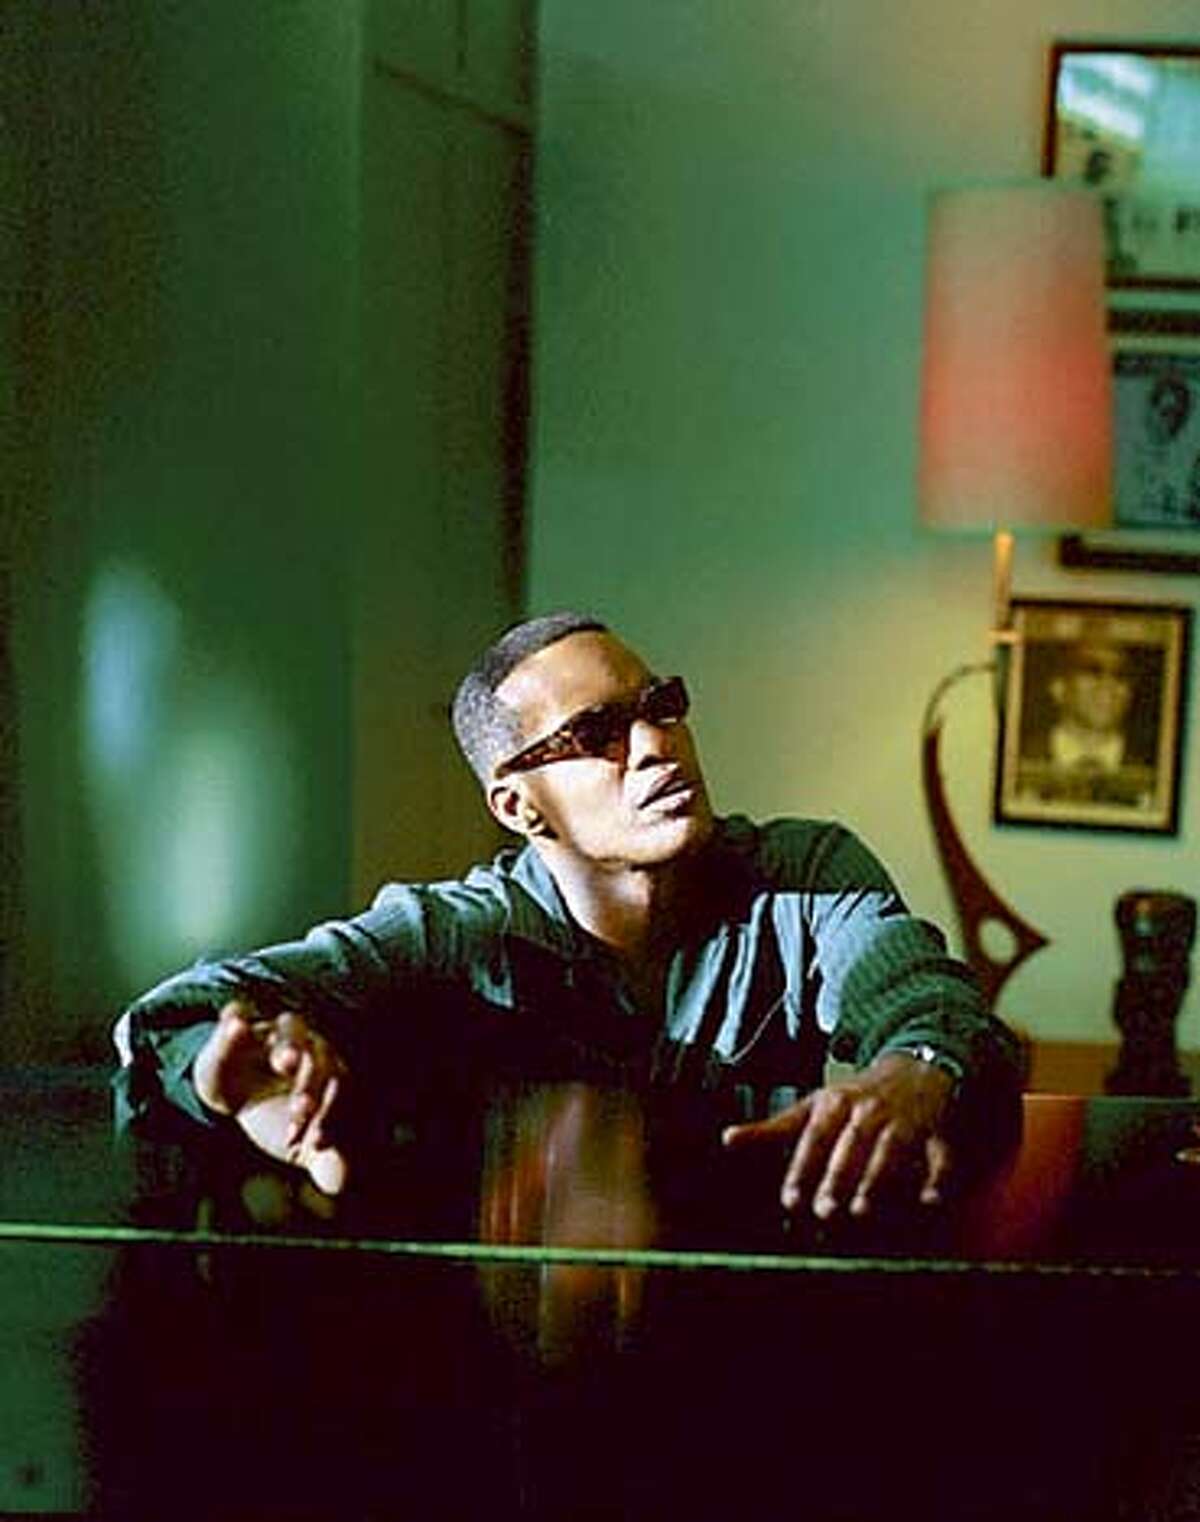 JAMIE FOXX as American legend Ray Charles in the musical biographical drama, Ray. Datebook#Datebook#SundayDateBook#10-24-2004#ALL#Advance##0422414916